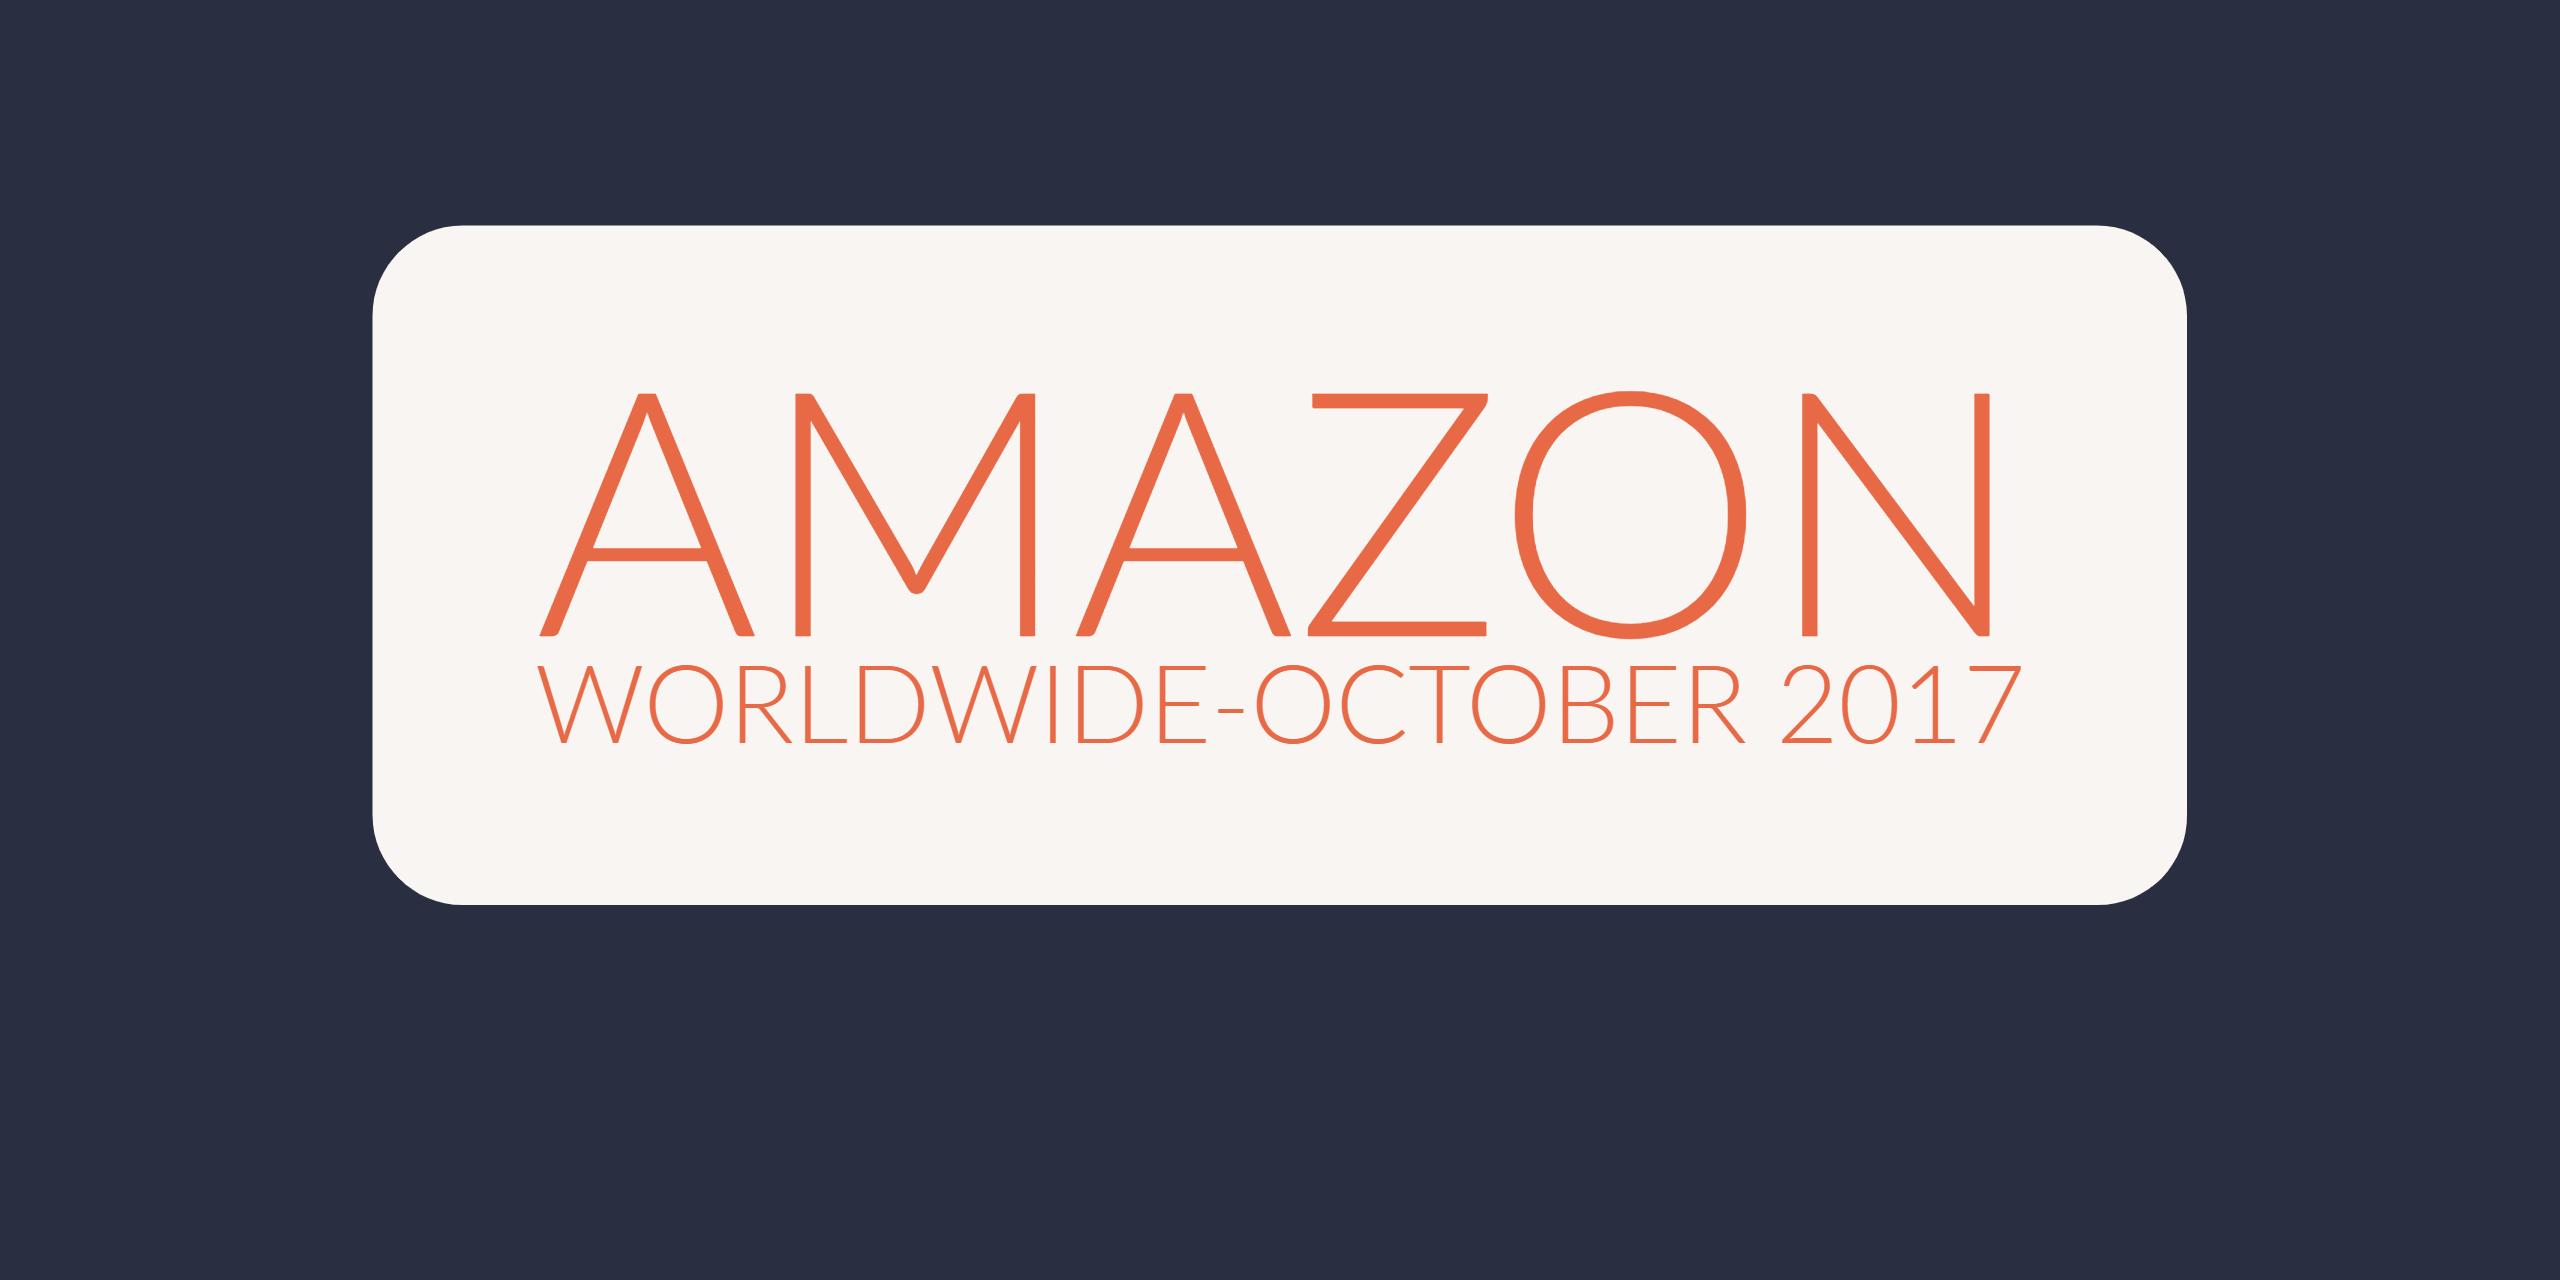 How Many Products Does Amazon Sell Worldwide – October 2017